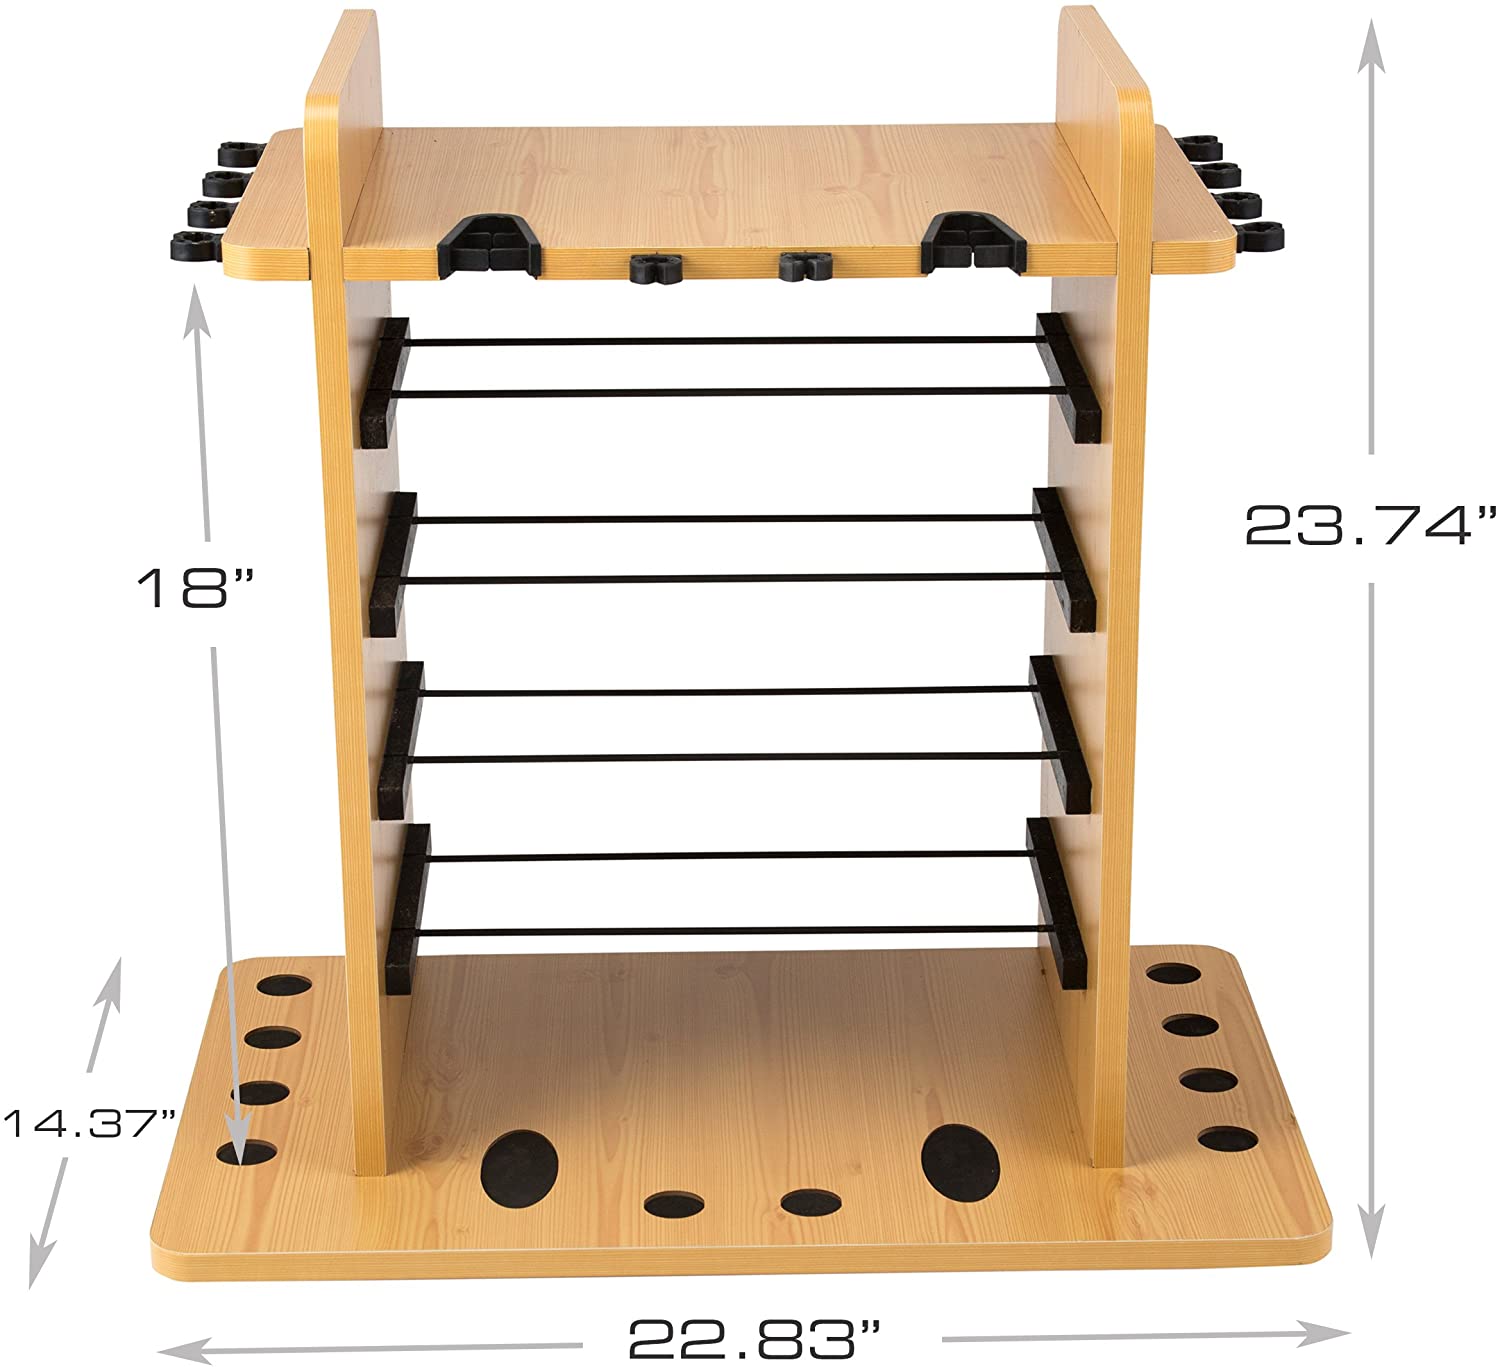 Rush Creek Creations 14 Fishing Rod Rack with 4 Utility Box Storage Capacity & Dual Rod Clips - Features a Sleek Design & Wire Racking System - image 3 of 8